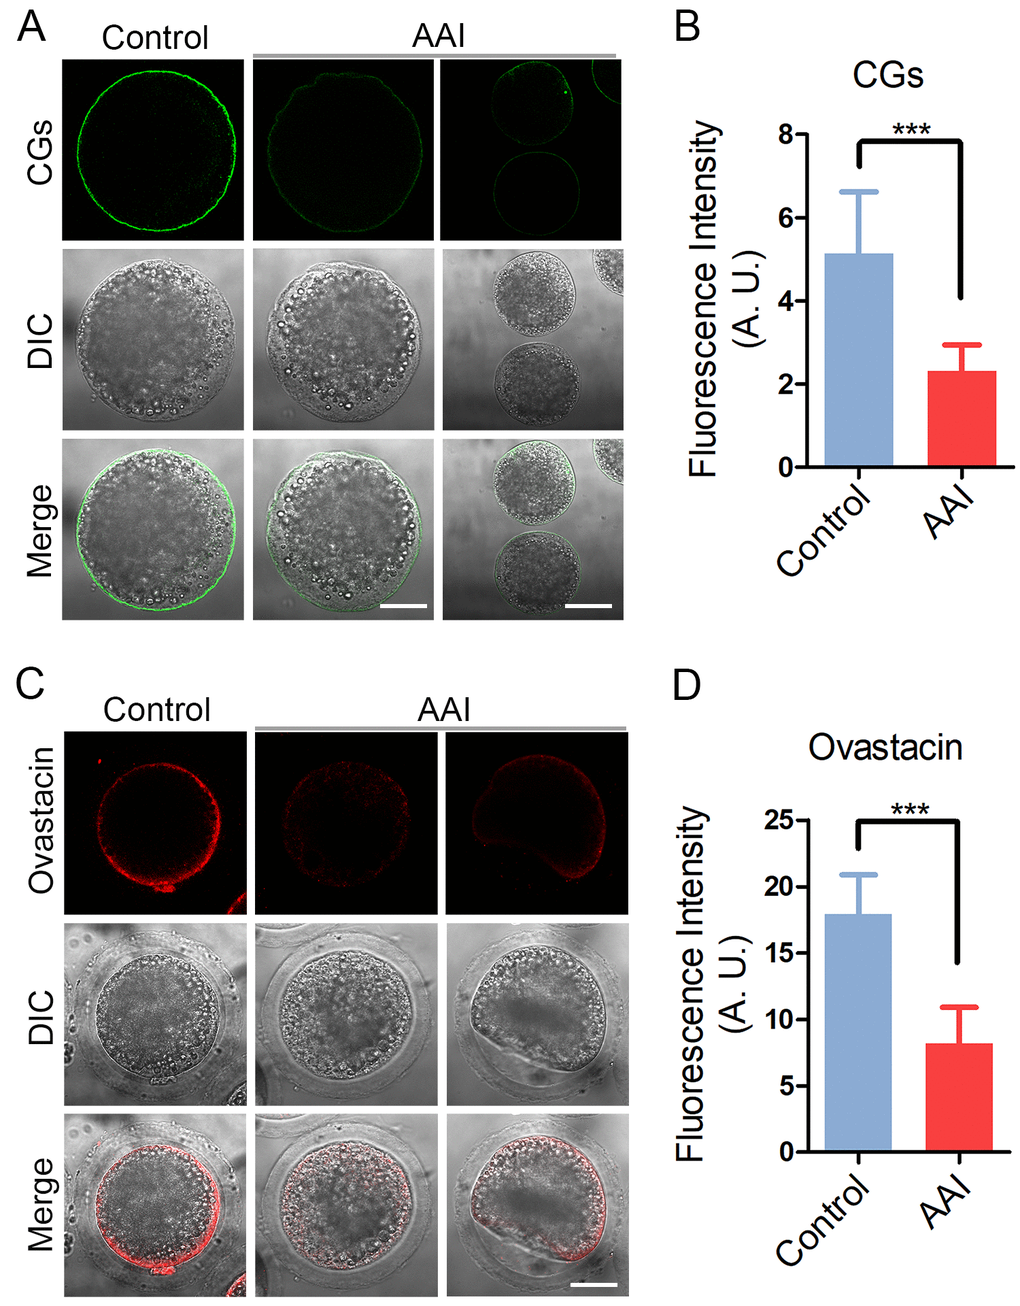 Effects of AAI exposure on the distribution of cortical granules and ovastacin in porcine oocytes. (A) Representative images of cortical granule localization in control and AAI-exposed oocytes. MII oocytes cultured for 44 h in vitro were stained with LCA-FITC to display the cortical granules. Scale bar, 30 and 60 μm. (B) The fluorescence intensity of cortical granules was measured around the signals on the plasma membrane in control and AAI-exposed oocytes. (C) Representative images of ovastacin localization in control and AAI-exposed oocytes. Ovastacin was immunostained with rabbit polyclonal anti-human ovastacin antibody and imaged by confocal microscope. Scale bar, 30 μm. (D) The fluorescence intensity of ovastacin was measured in control and AAI-exposed oocytes. Data in (B) and (D) were presented as mean percentage (mean ± SEM) of at least three independent experiments. ***P 